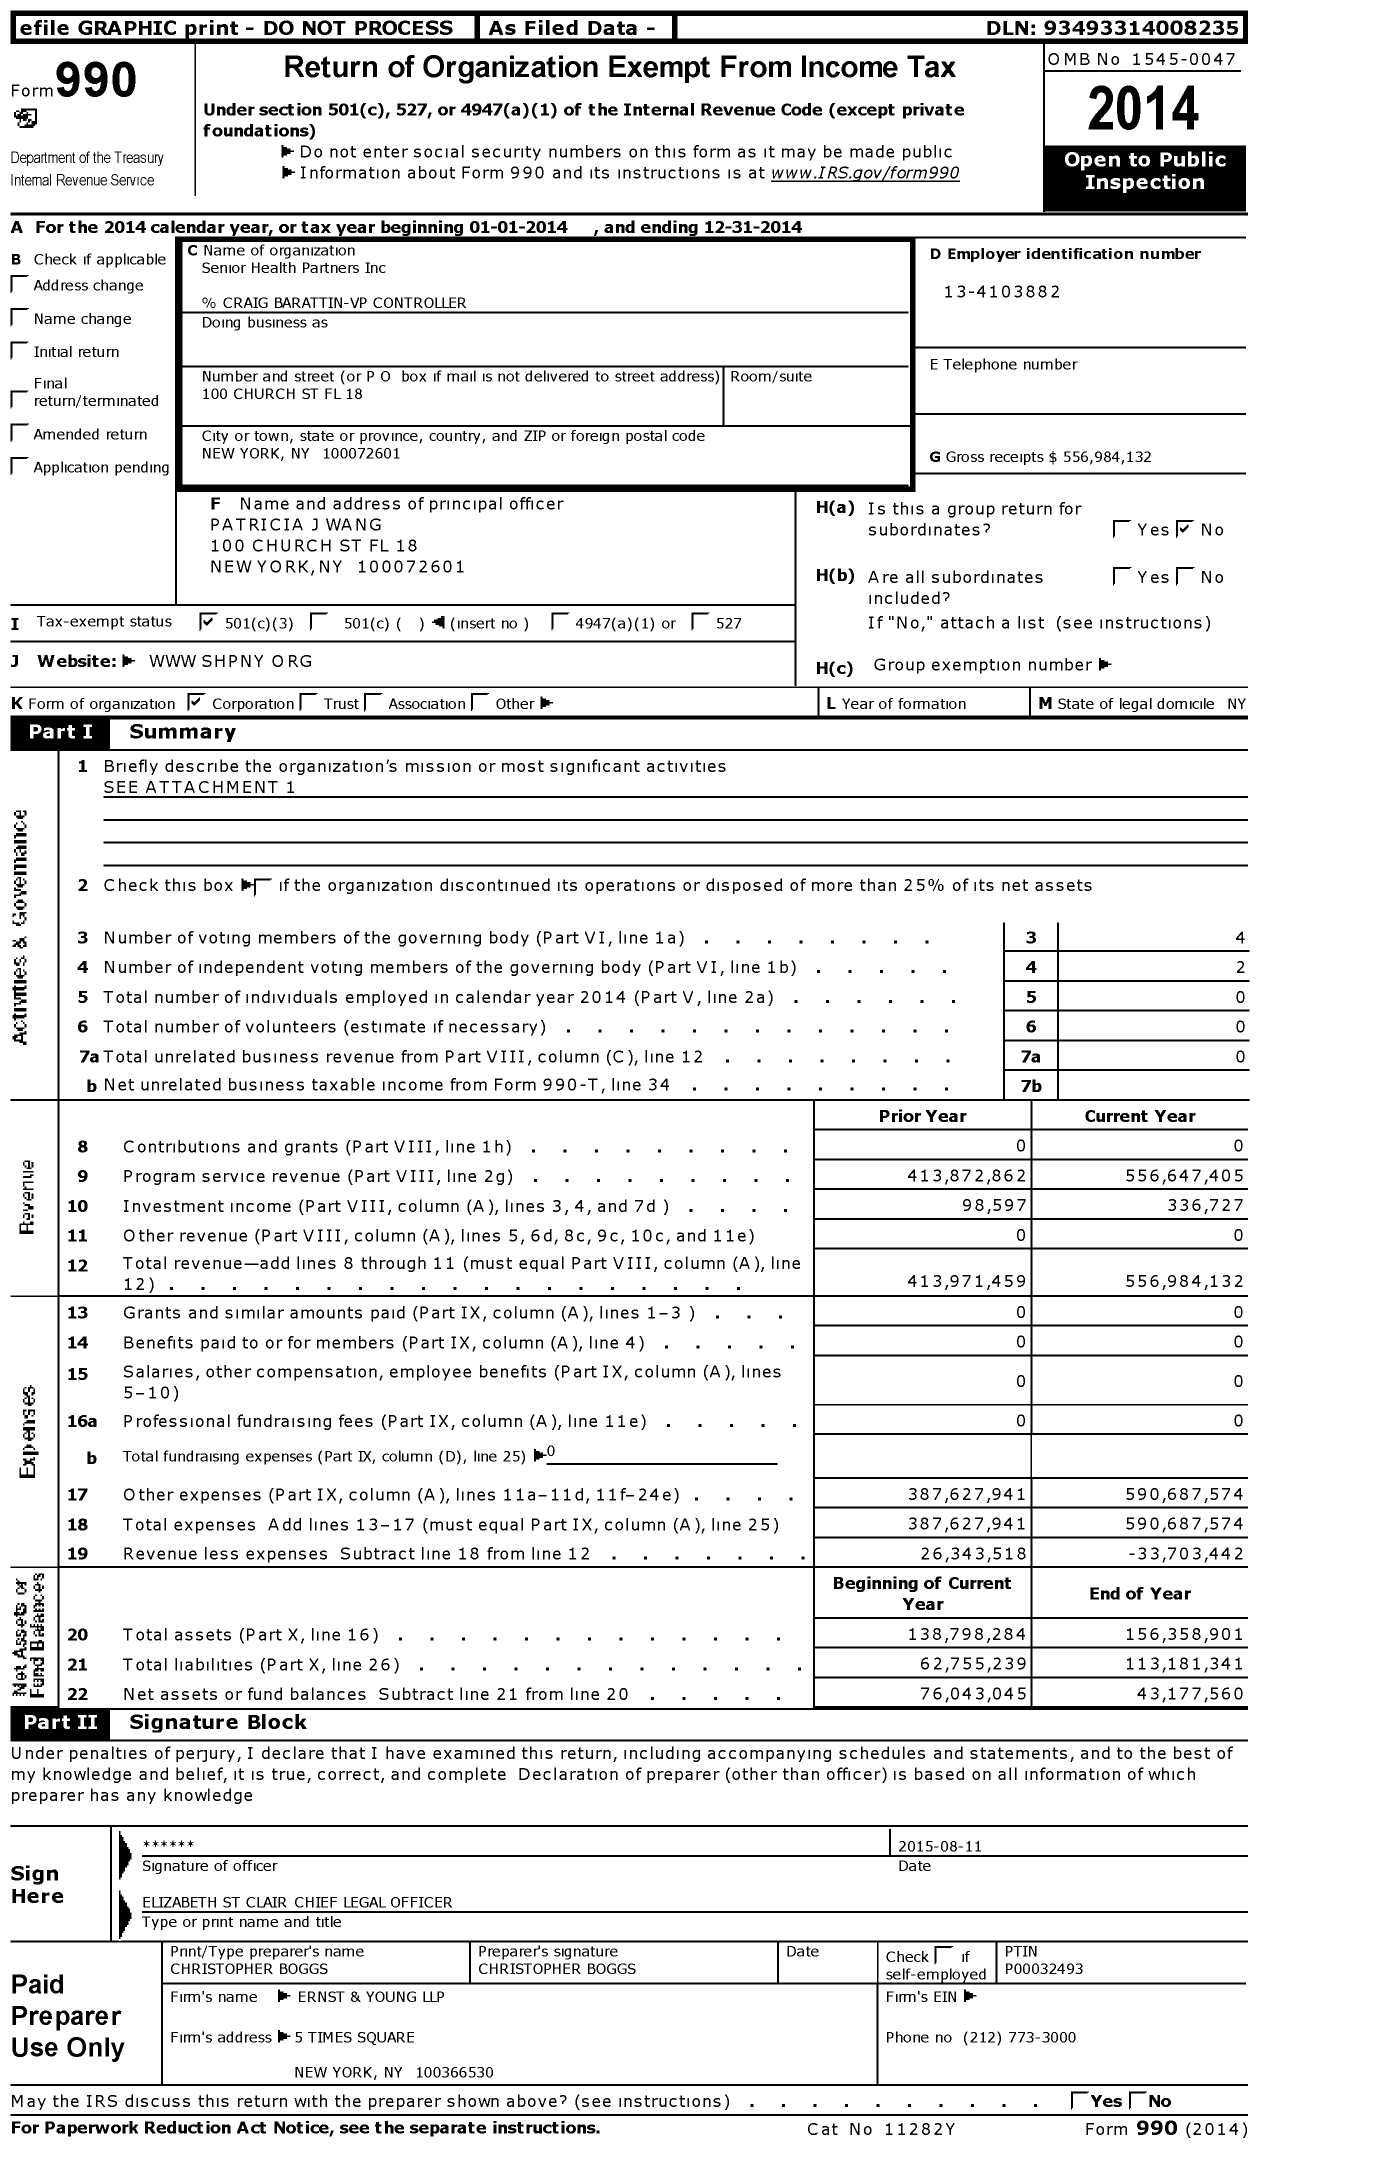 Image of first page of 2014 Form 990 for Healthfirst.